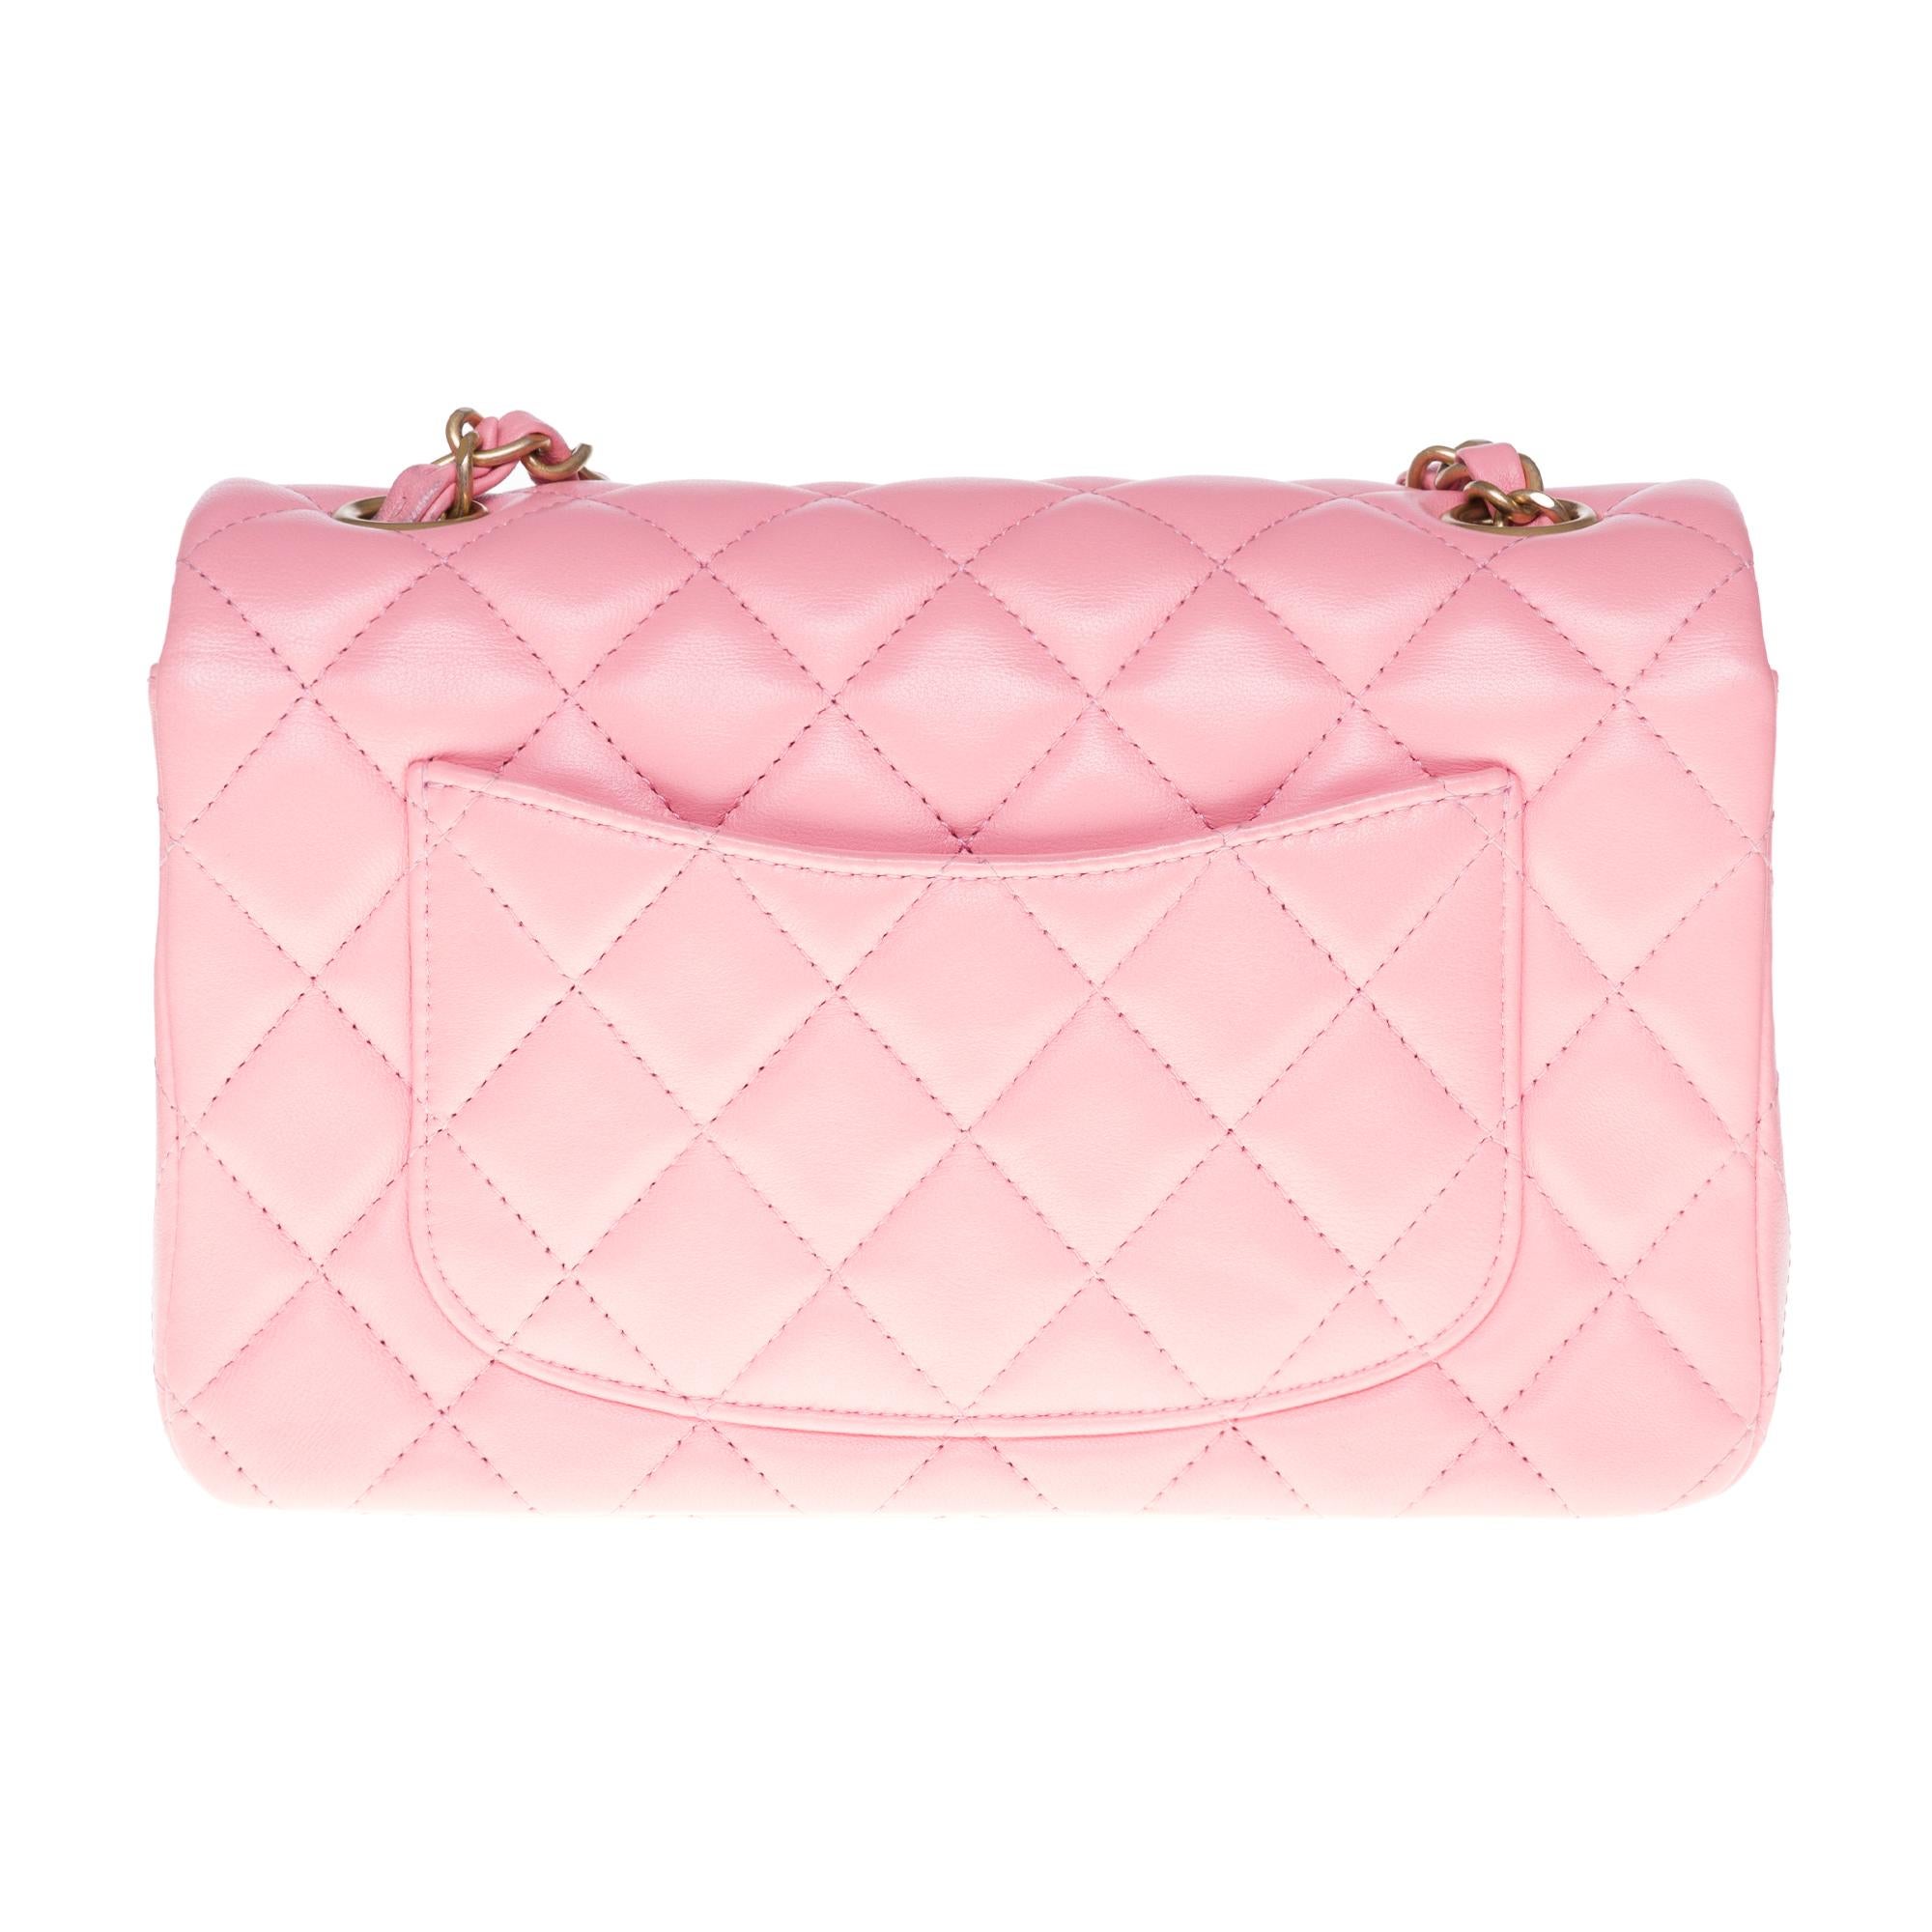 The superb shoulder bag Chanel Mini Timeless in pink quilted leather, gold metal hardware, silver metal chain handle intertwined with pink leather allowing a shoulder or shoulder strap.

Closure by flap.
A patch pocket on the back of the bag.
Lining